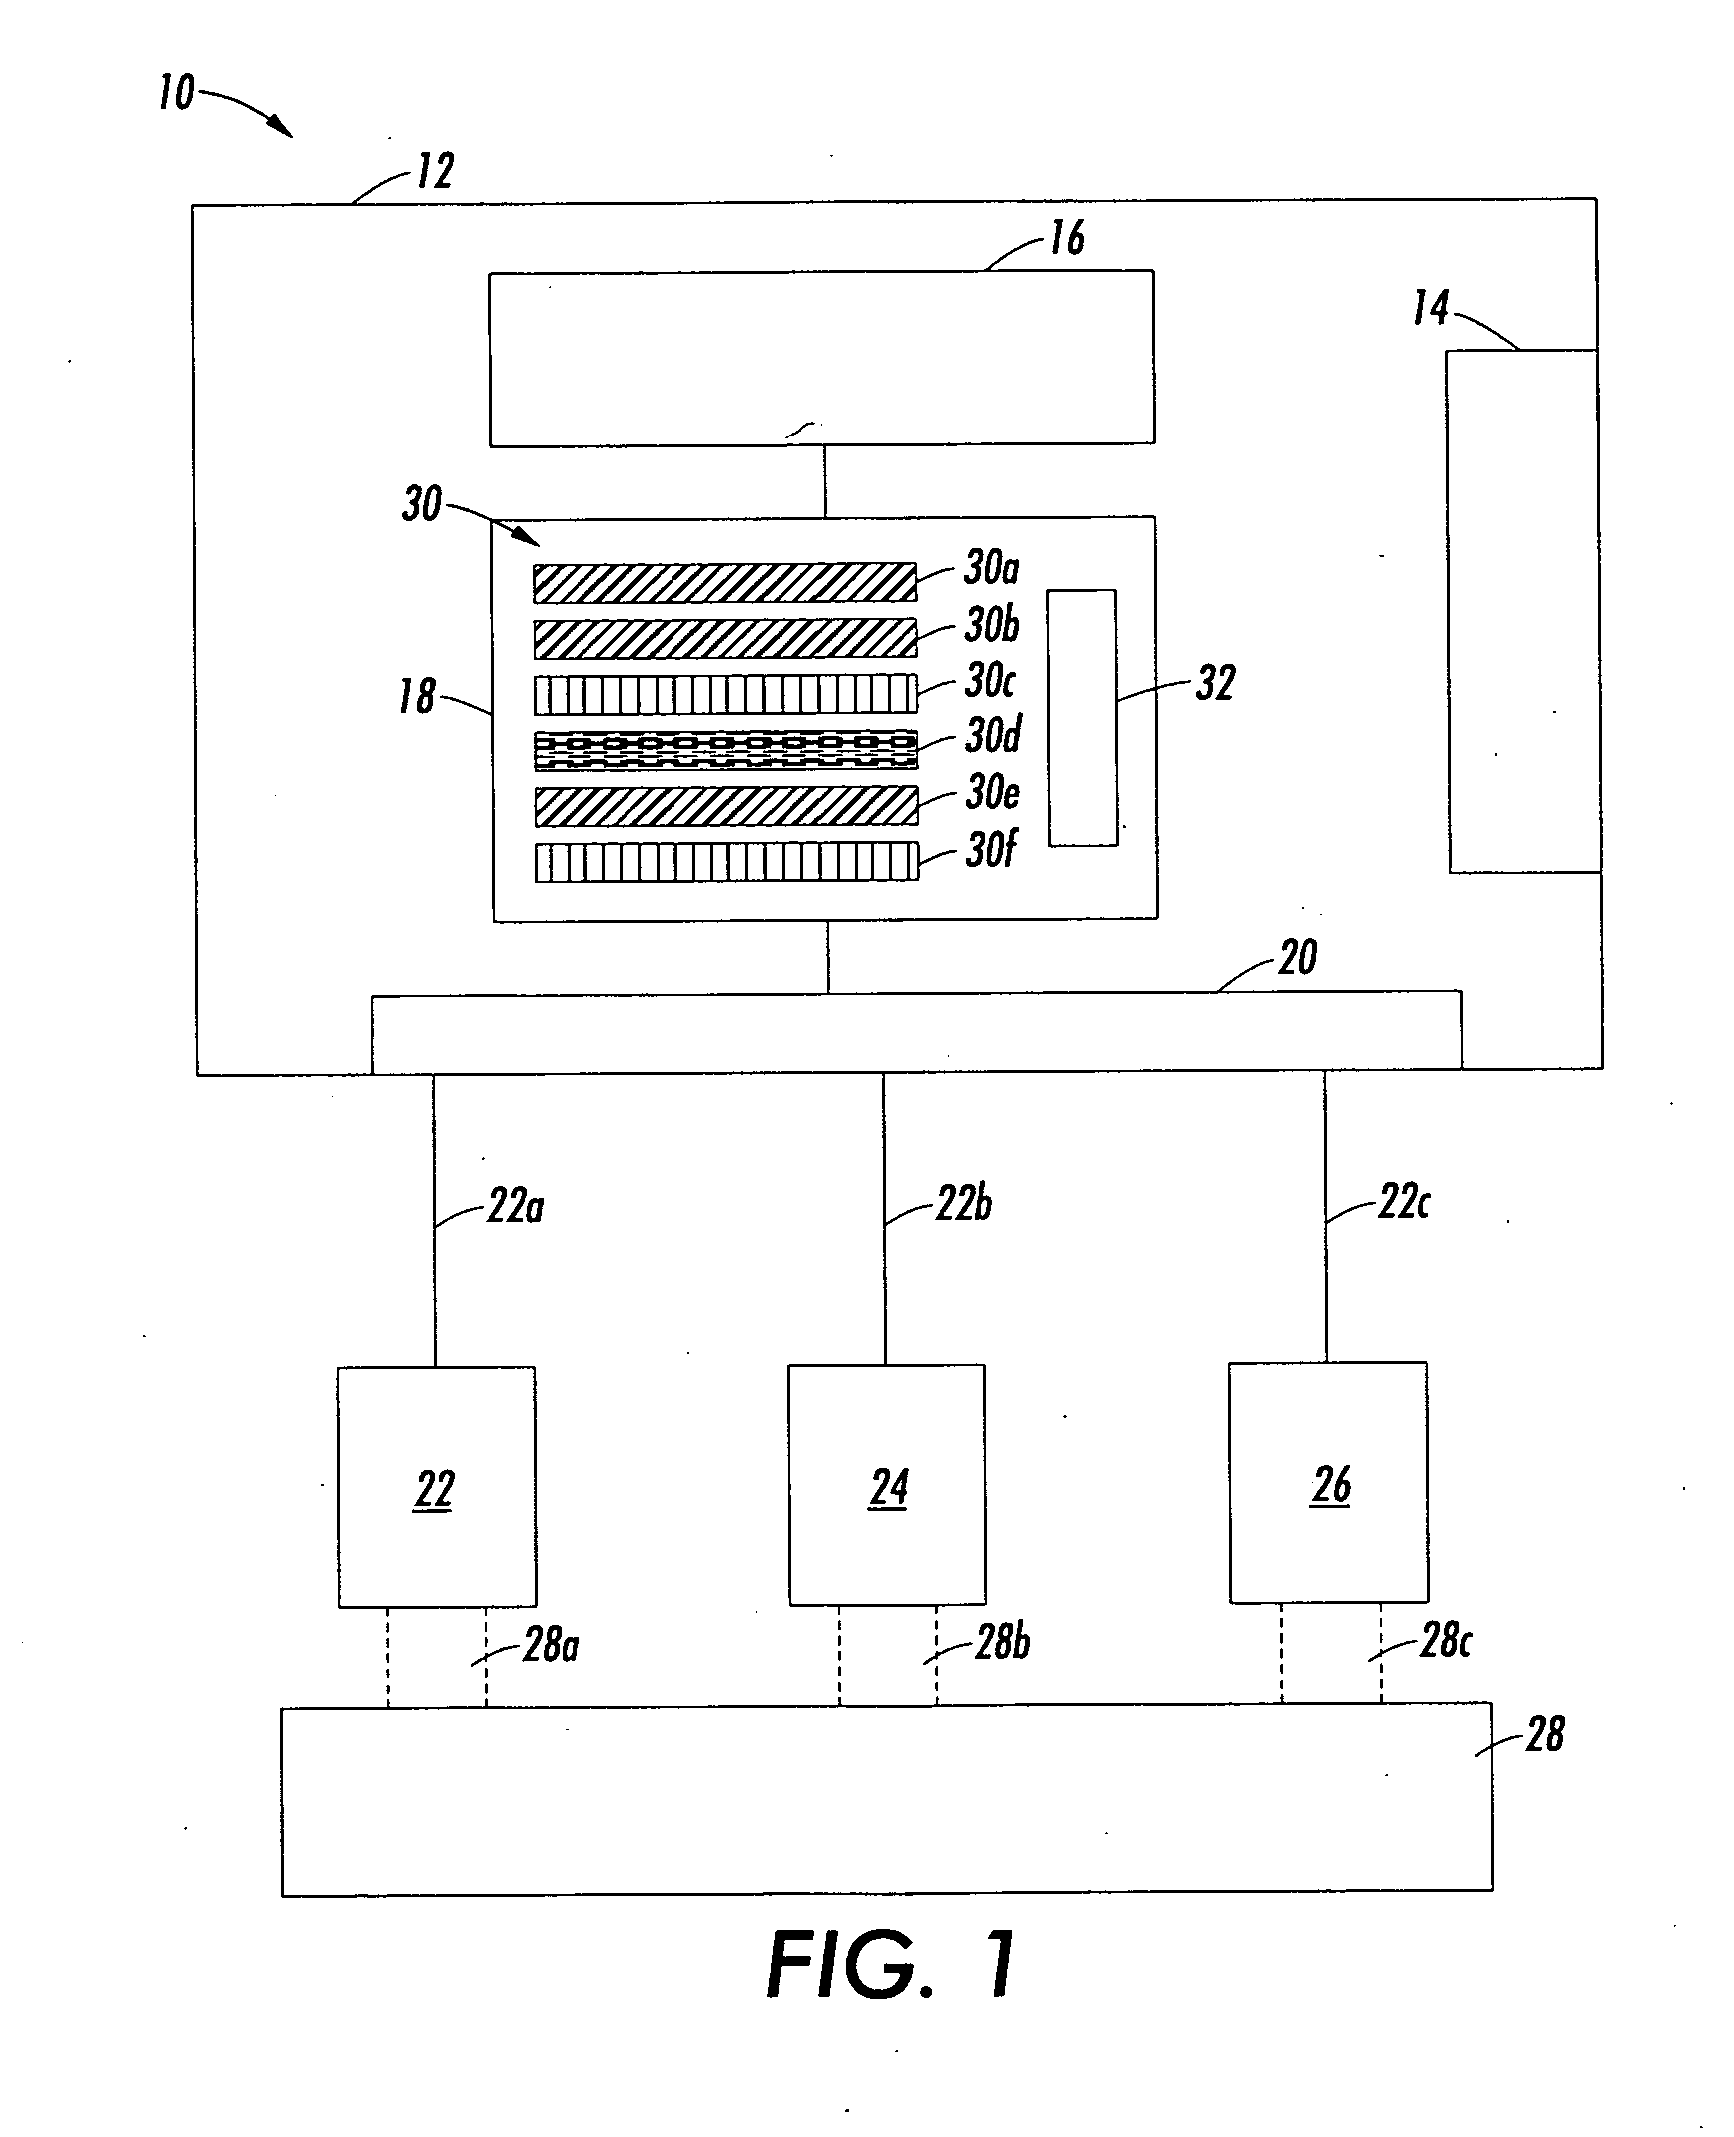 User configured page chromaticity determination and splitting method